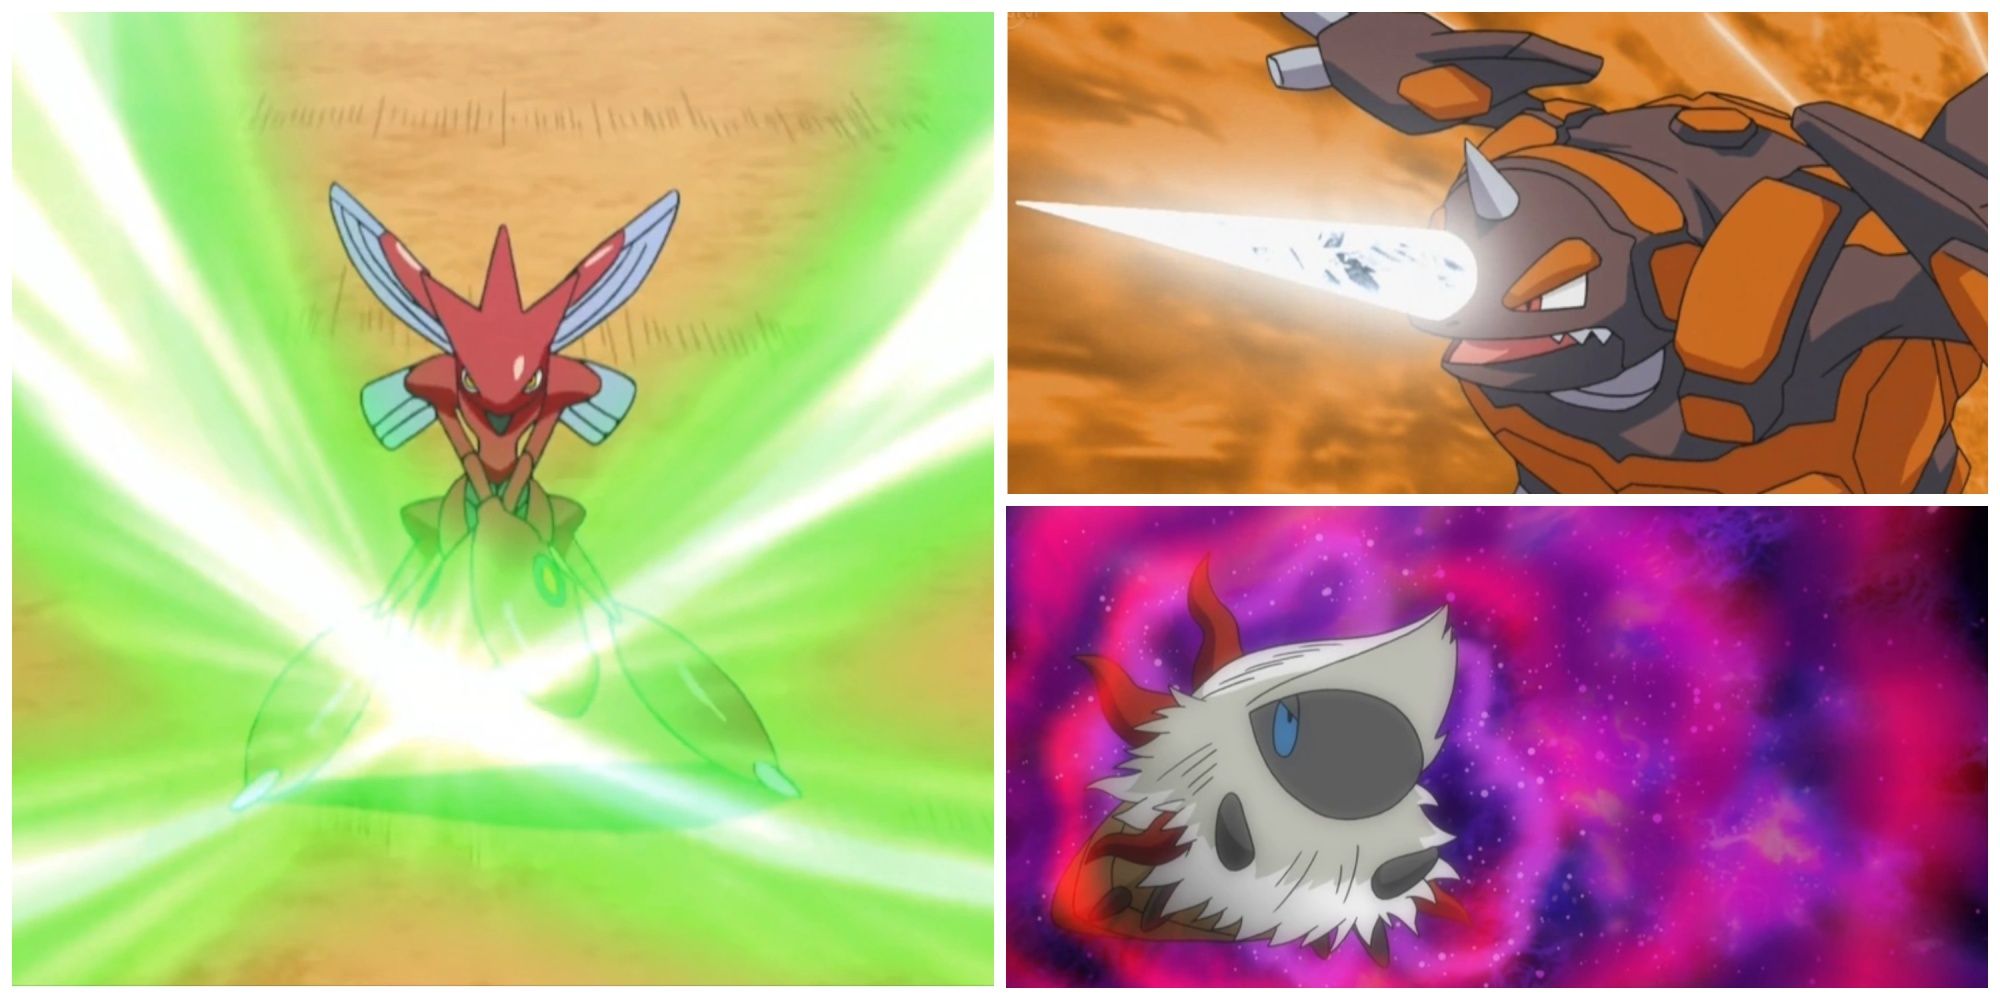 Scissor, Rhyperior, and the eldest all use bug-type attacks in their Pokemon